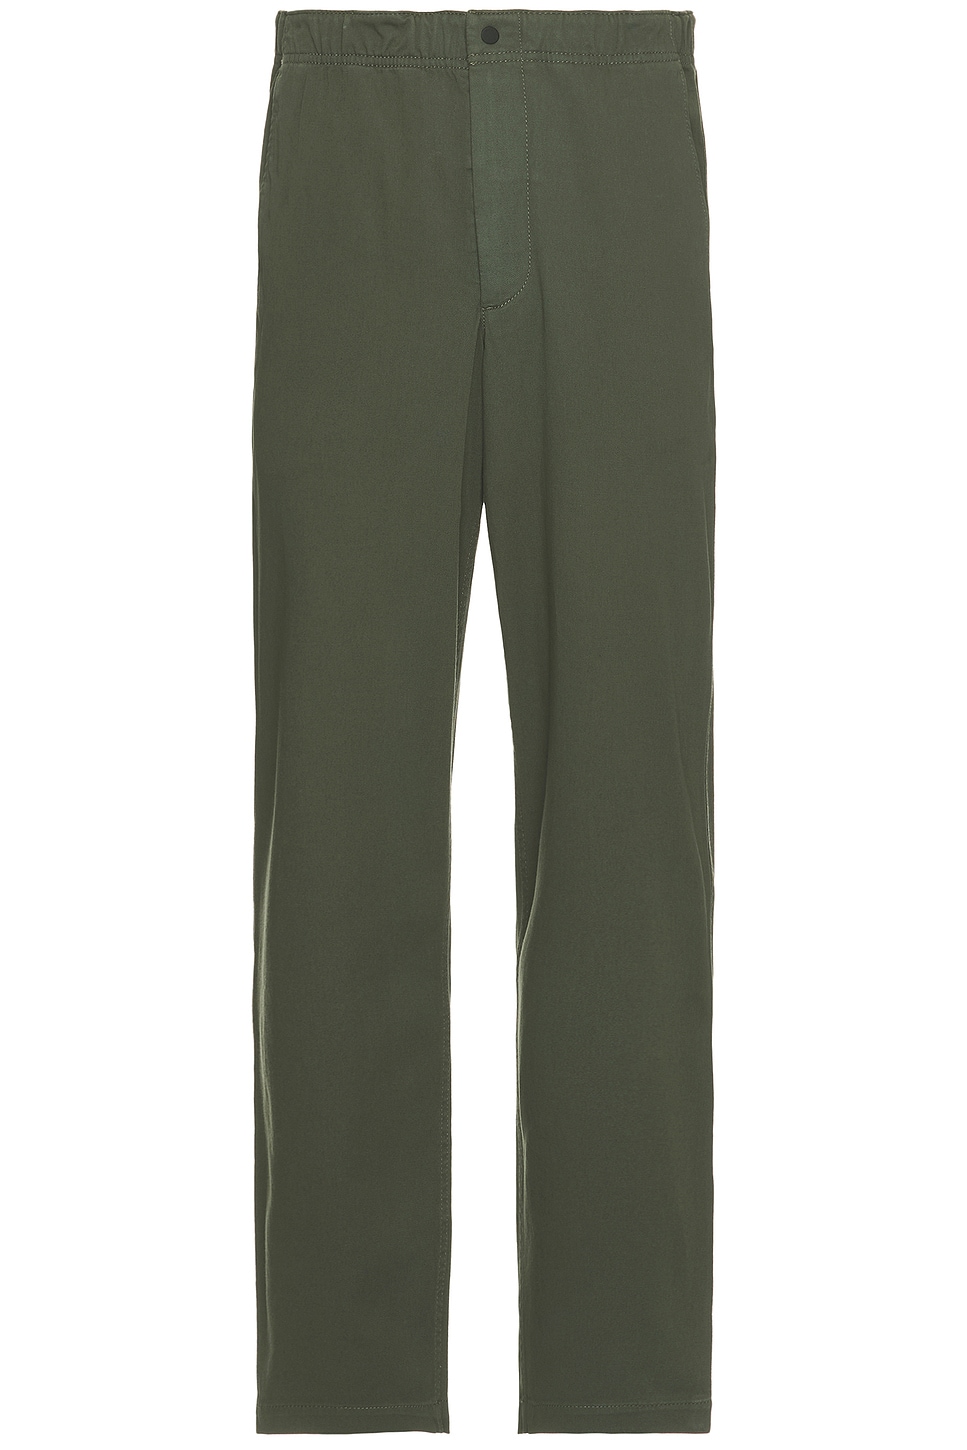 Image 1 of Norse Projects Ezra Relaxed Organic Stretch Twill Trouser in Spruce Green